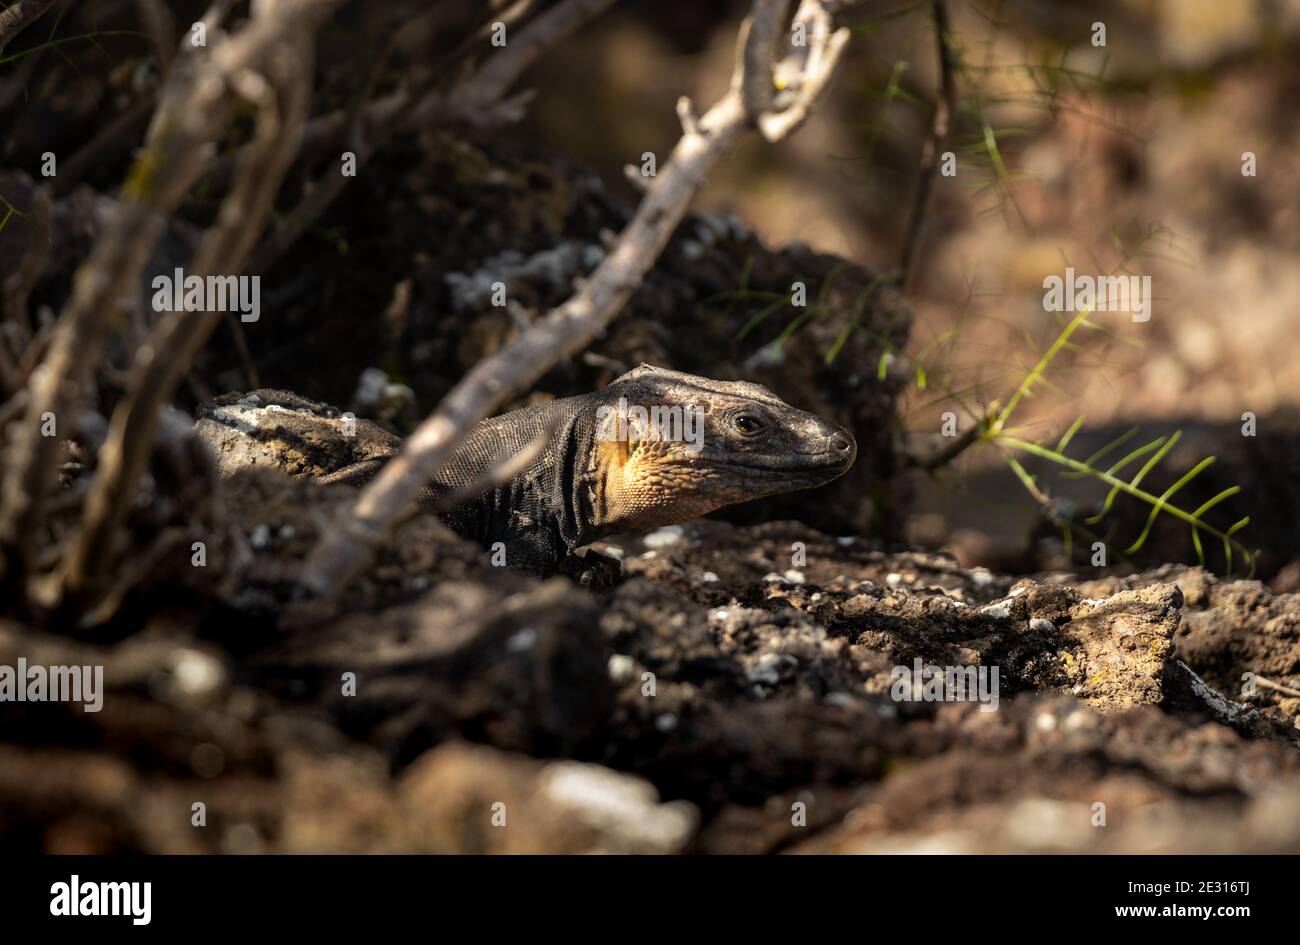 Giant lizard from Gran Canaria in the Viera y Clavijo Botanical Stock Photo